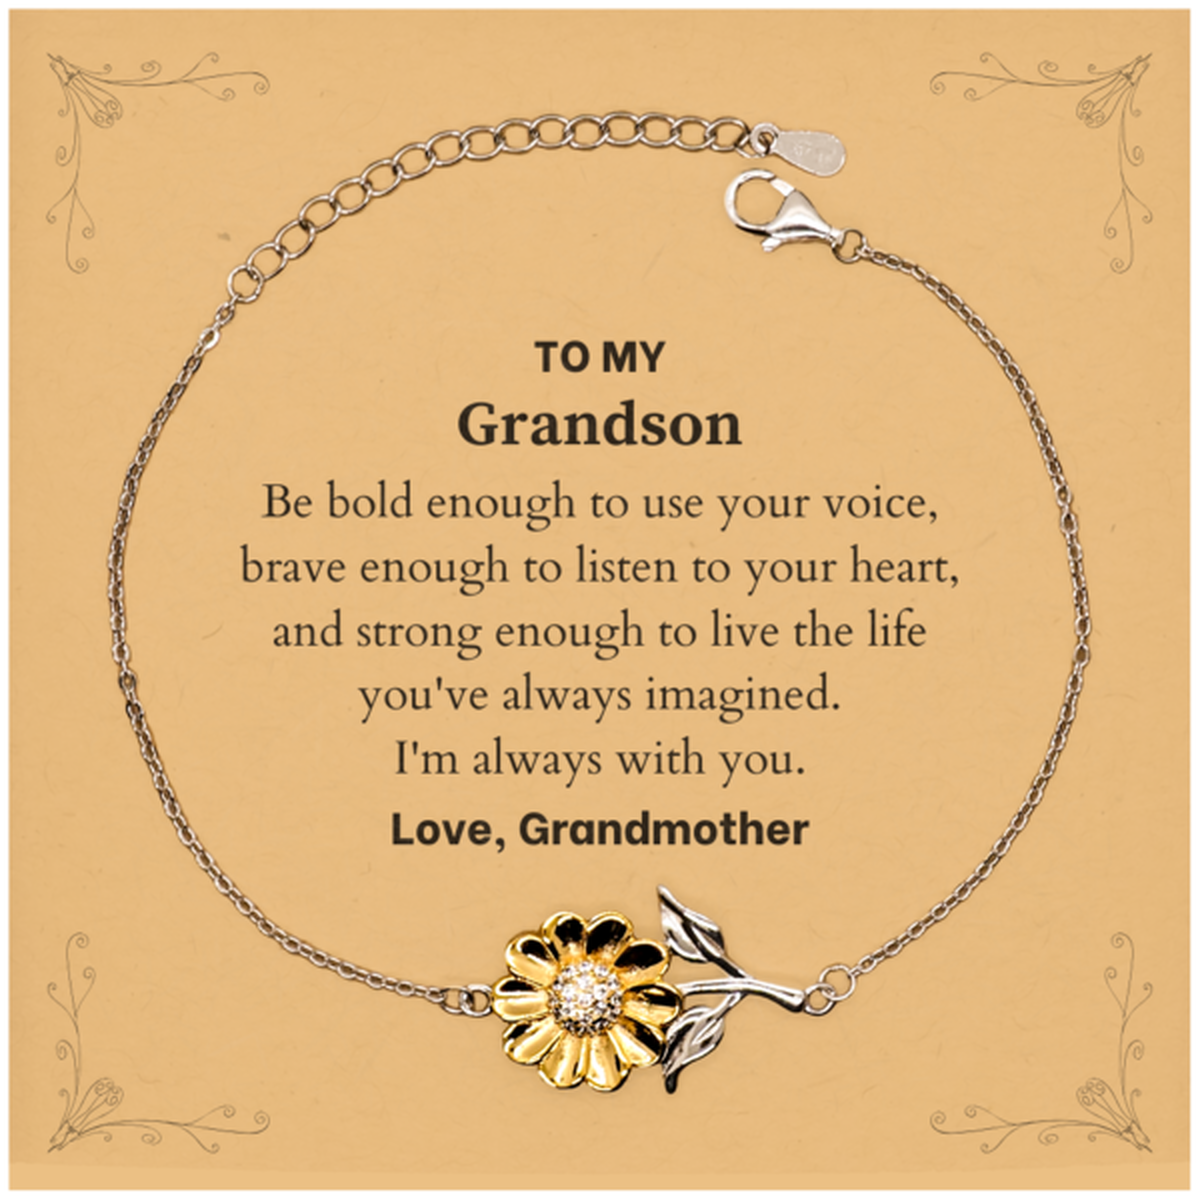 Keepsake Grandson Sunflower Bracelet Gift Idea Graduation Christmas Birthday Grandson from Grandmother, Grandson Be bold enough to use your voice, brave enough to listen to your heart. Love, Grandmother